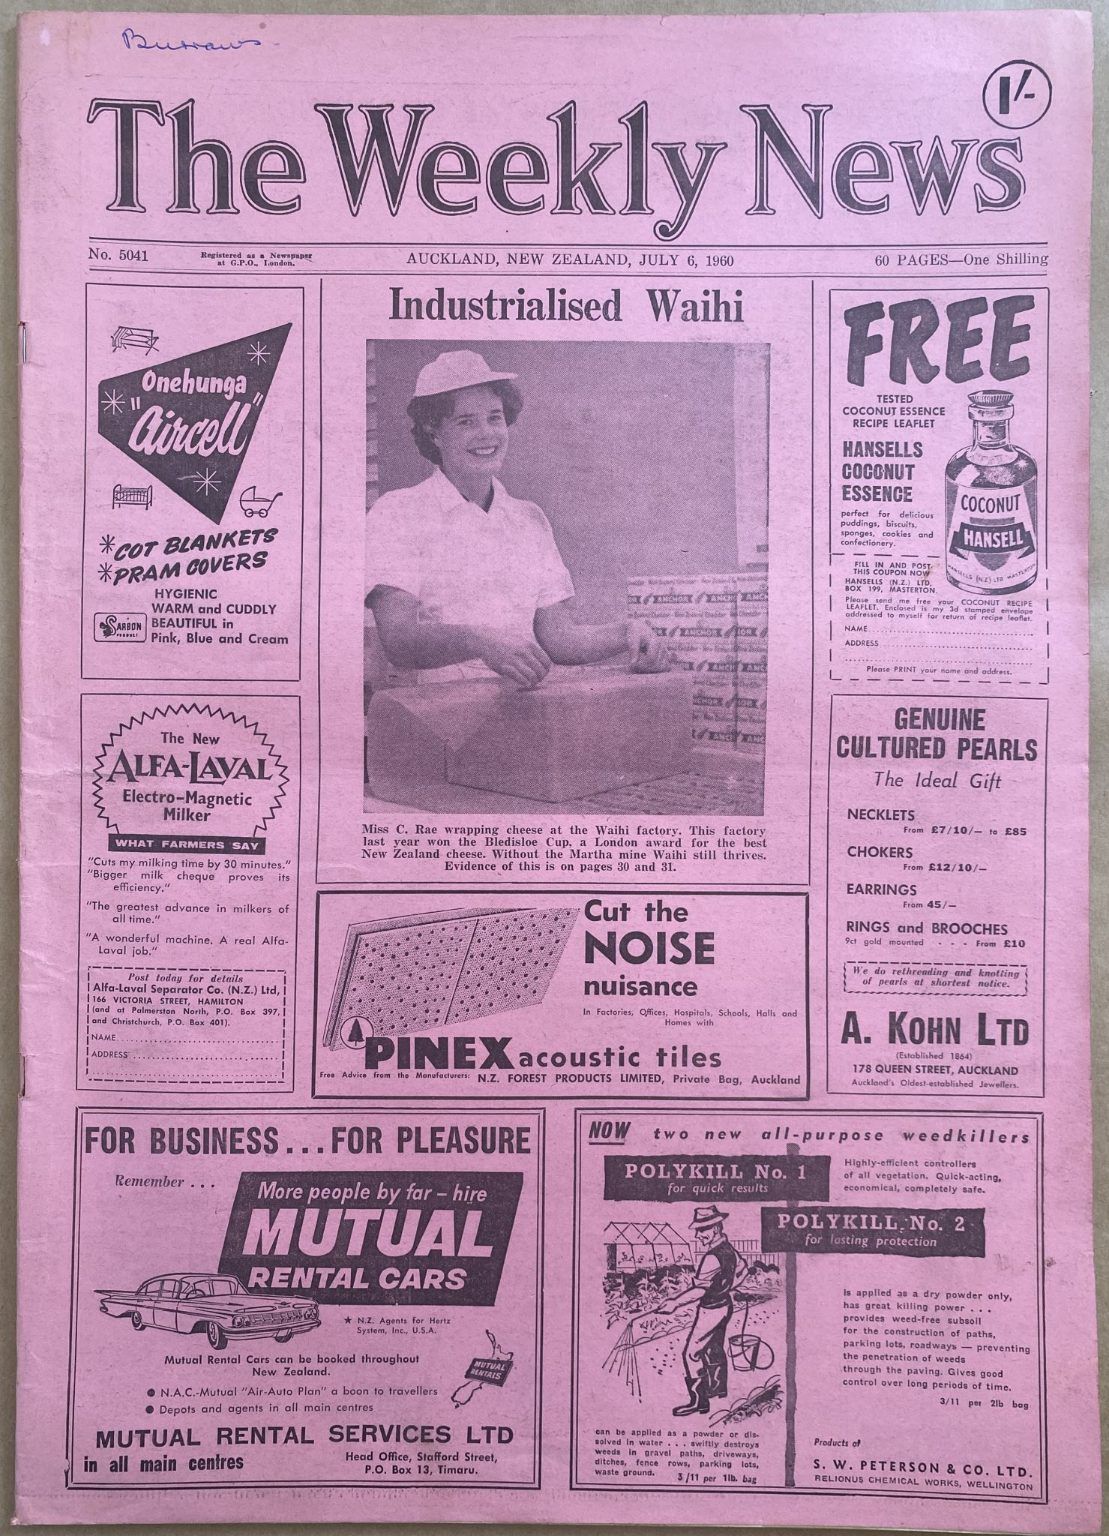 OLD NEWSPAPER: The Weekly News, No. 5041, 6 July 1960